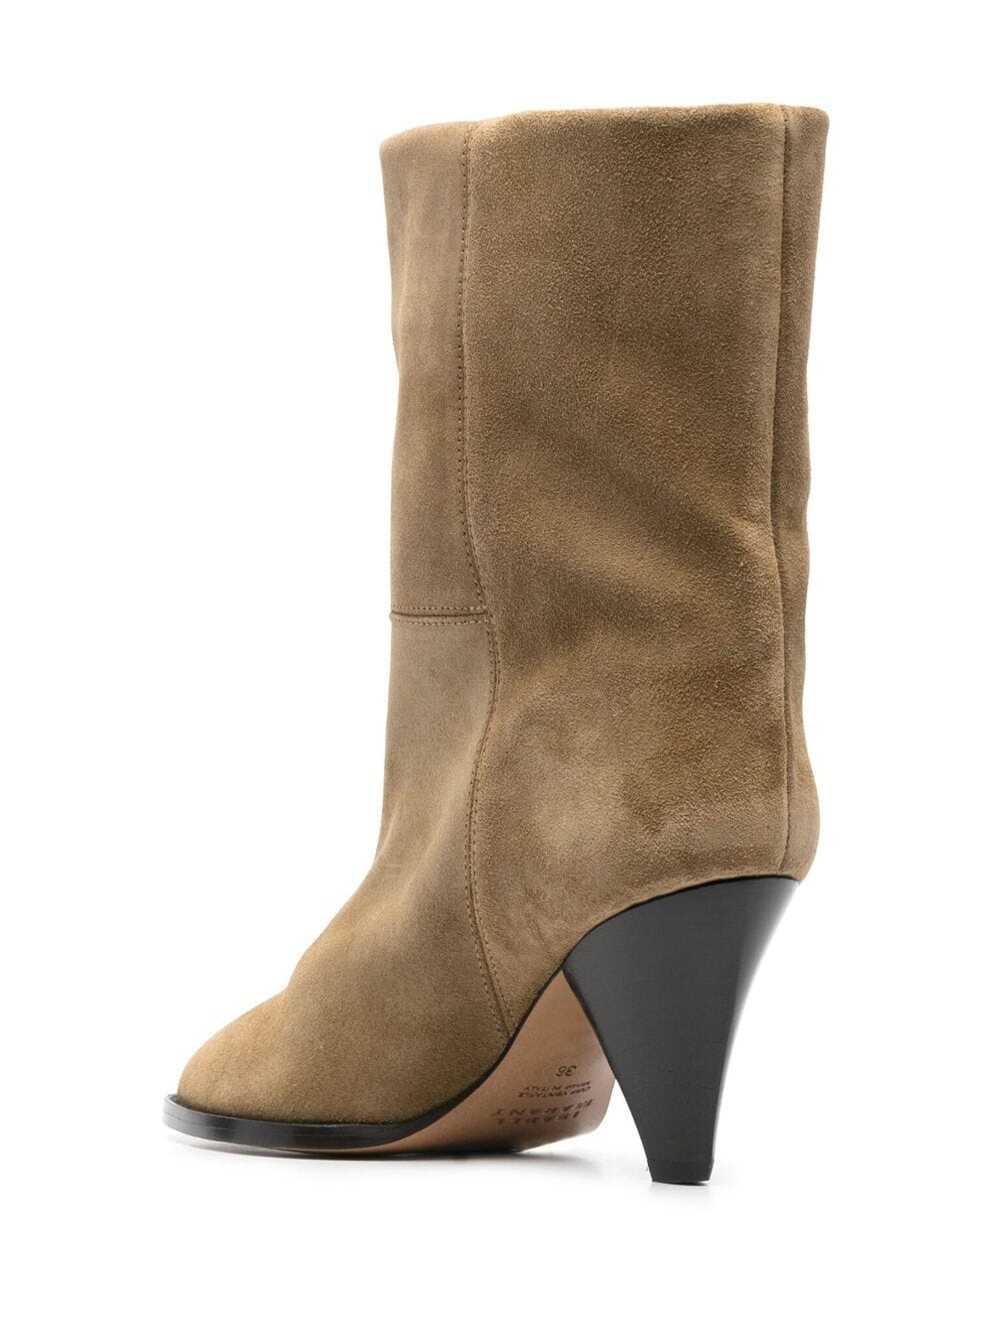 Isabel Marant Rouxa Suede Leather Boots in Brown | Lyst